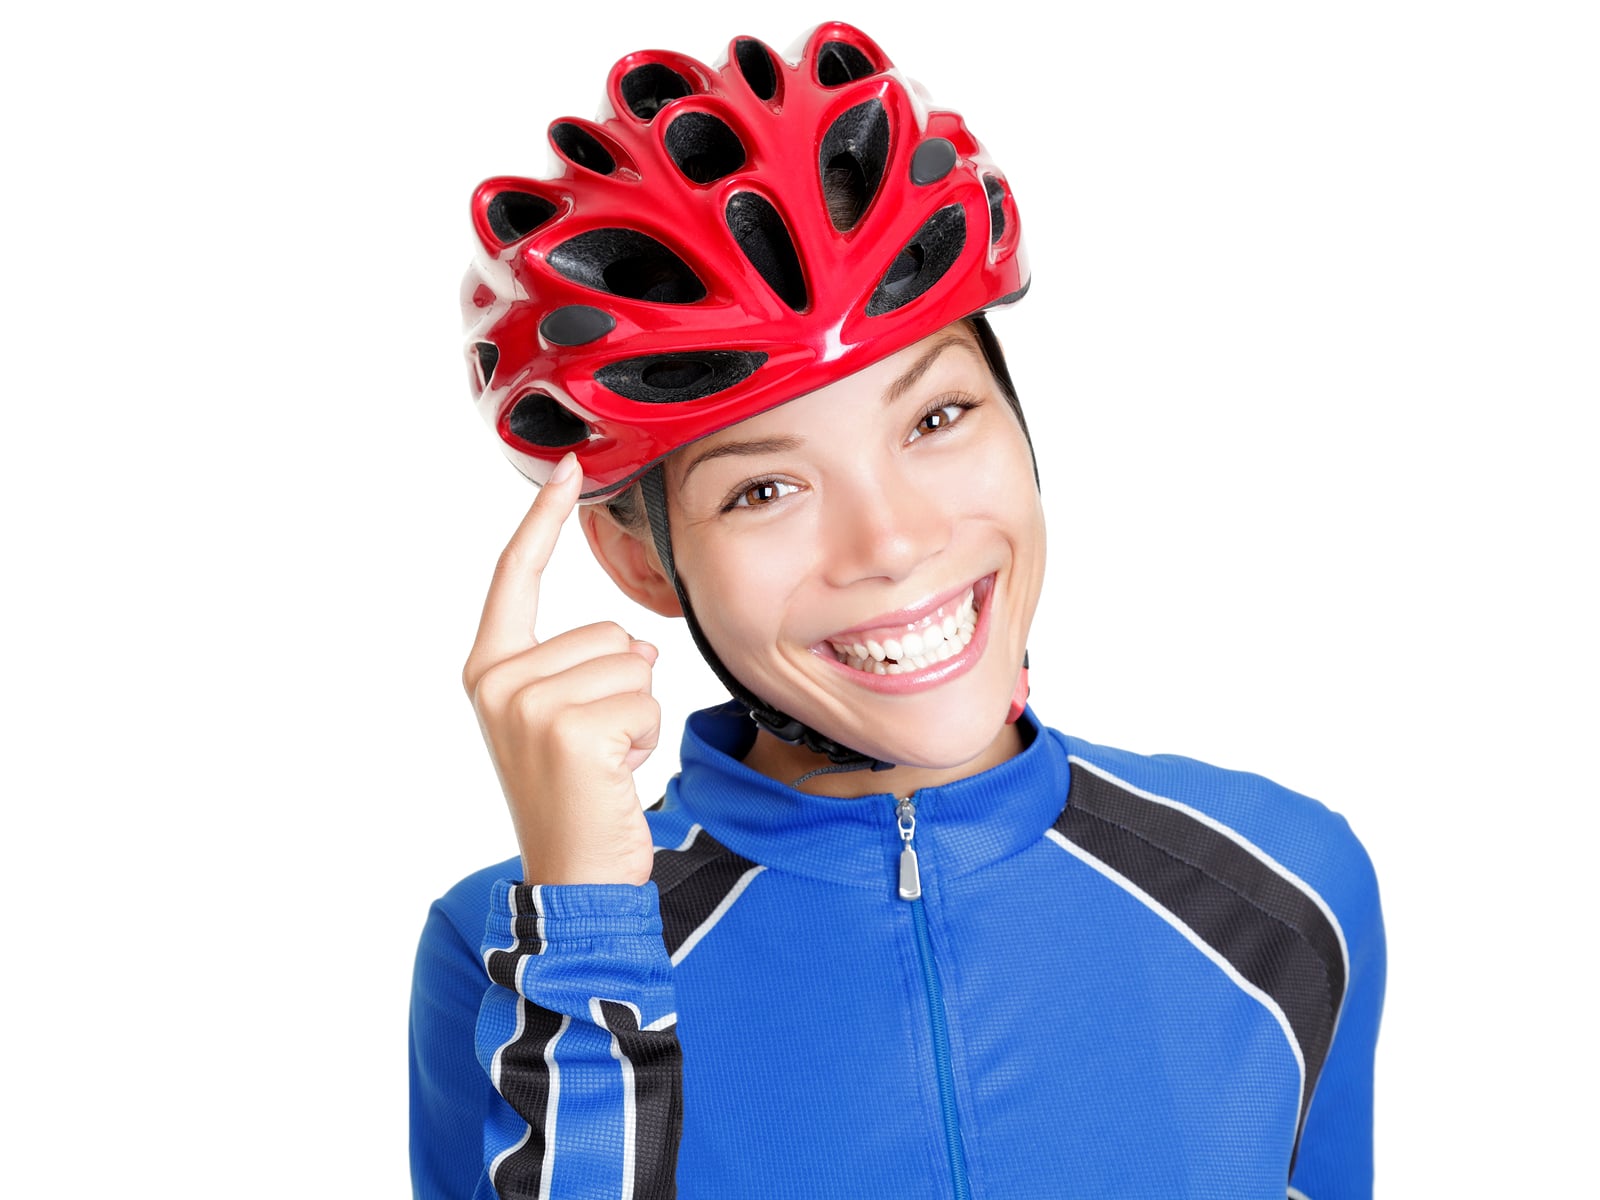 List of the Best Bike Helmets: Top Choices for Cyclist Safety